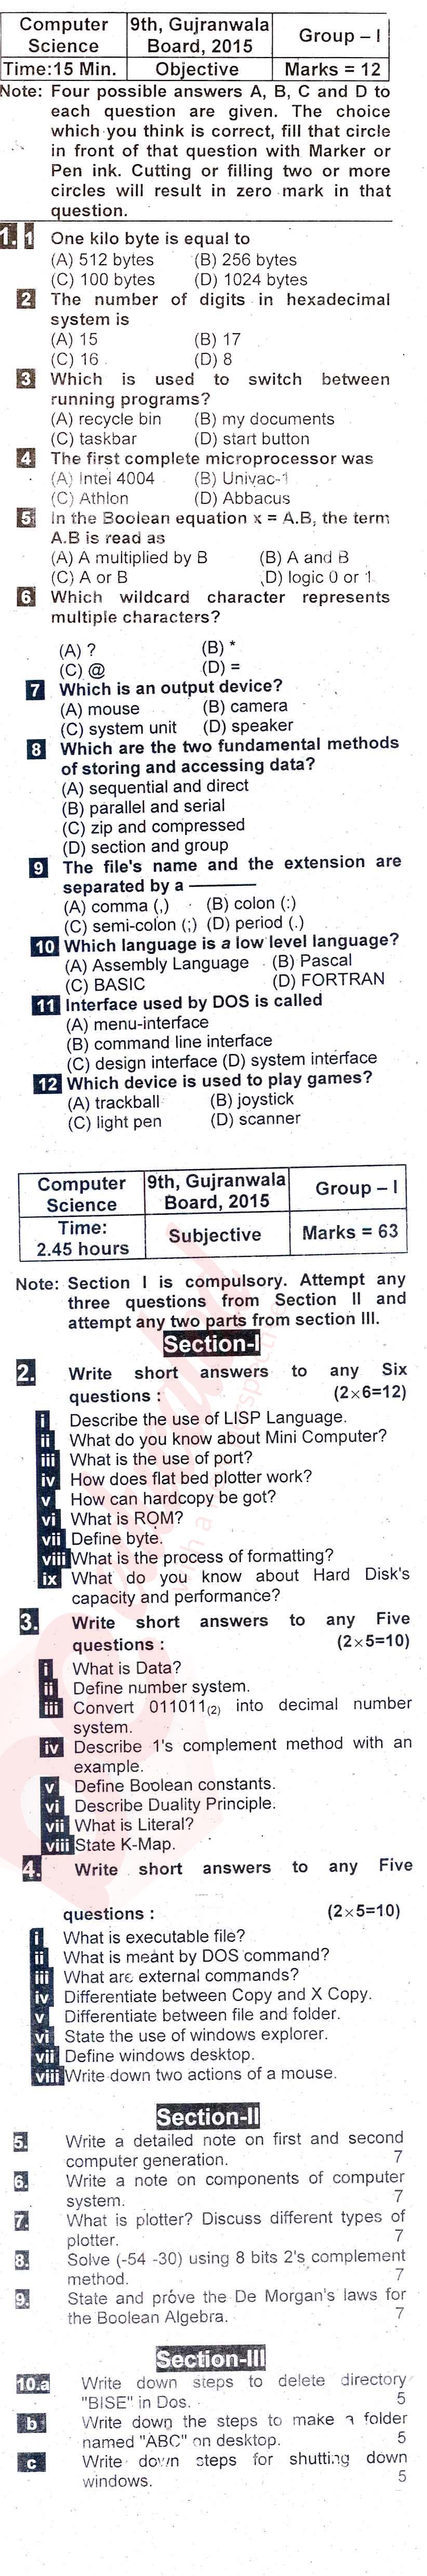 Computer Science 9th English Medium Past Paper Group 1 BISE Gujranwala 2015